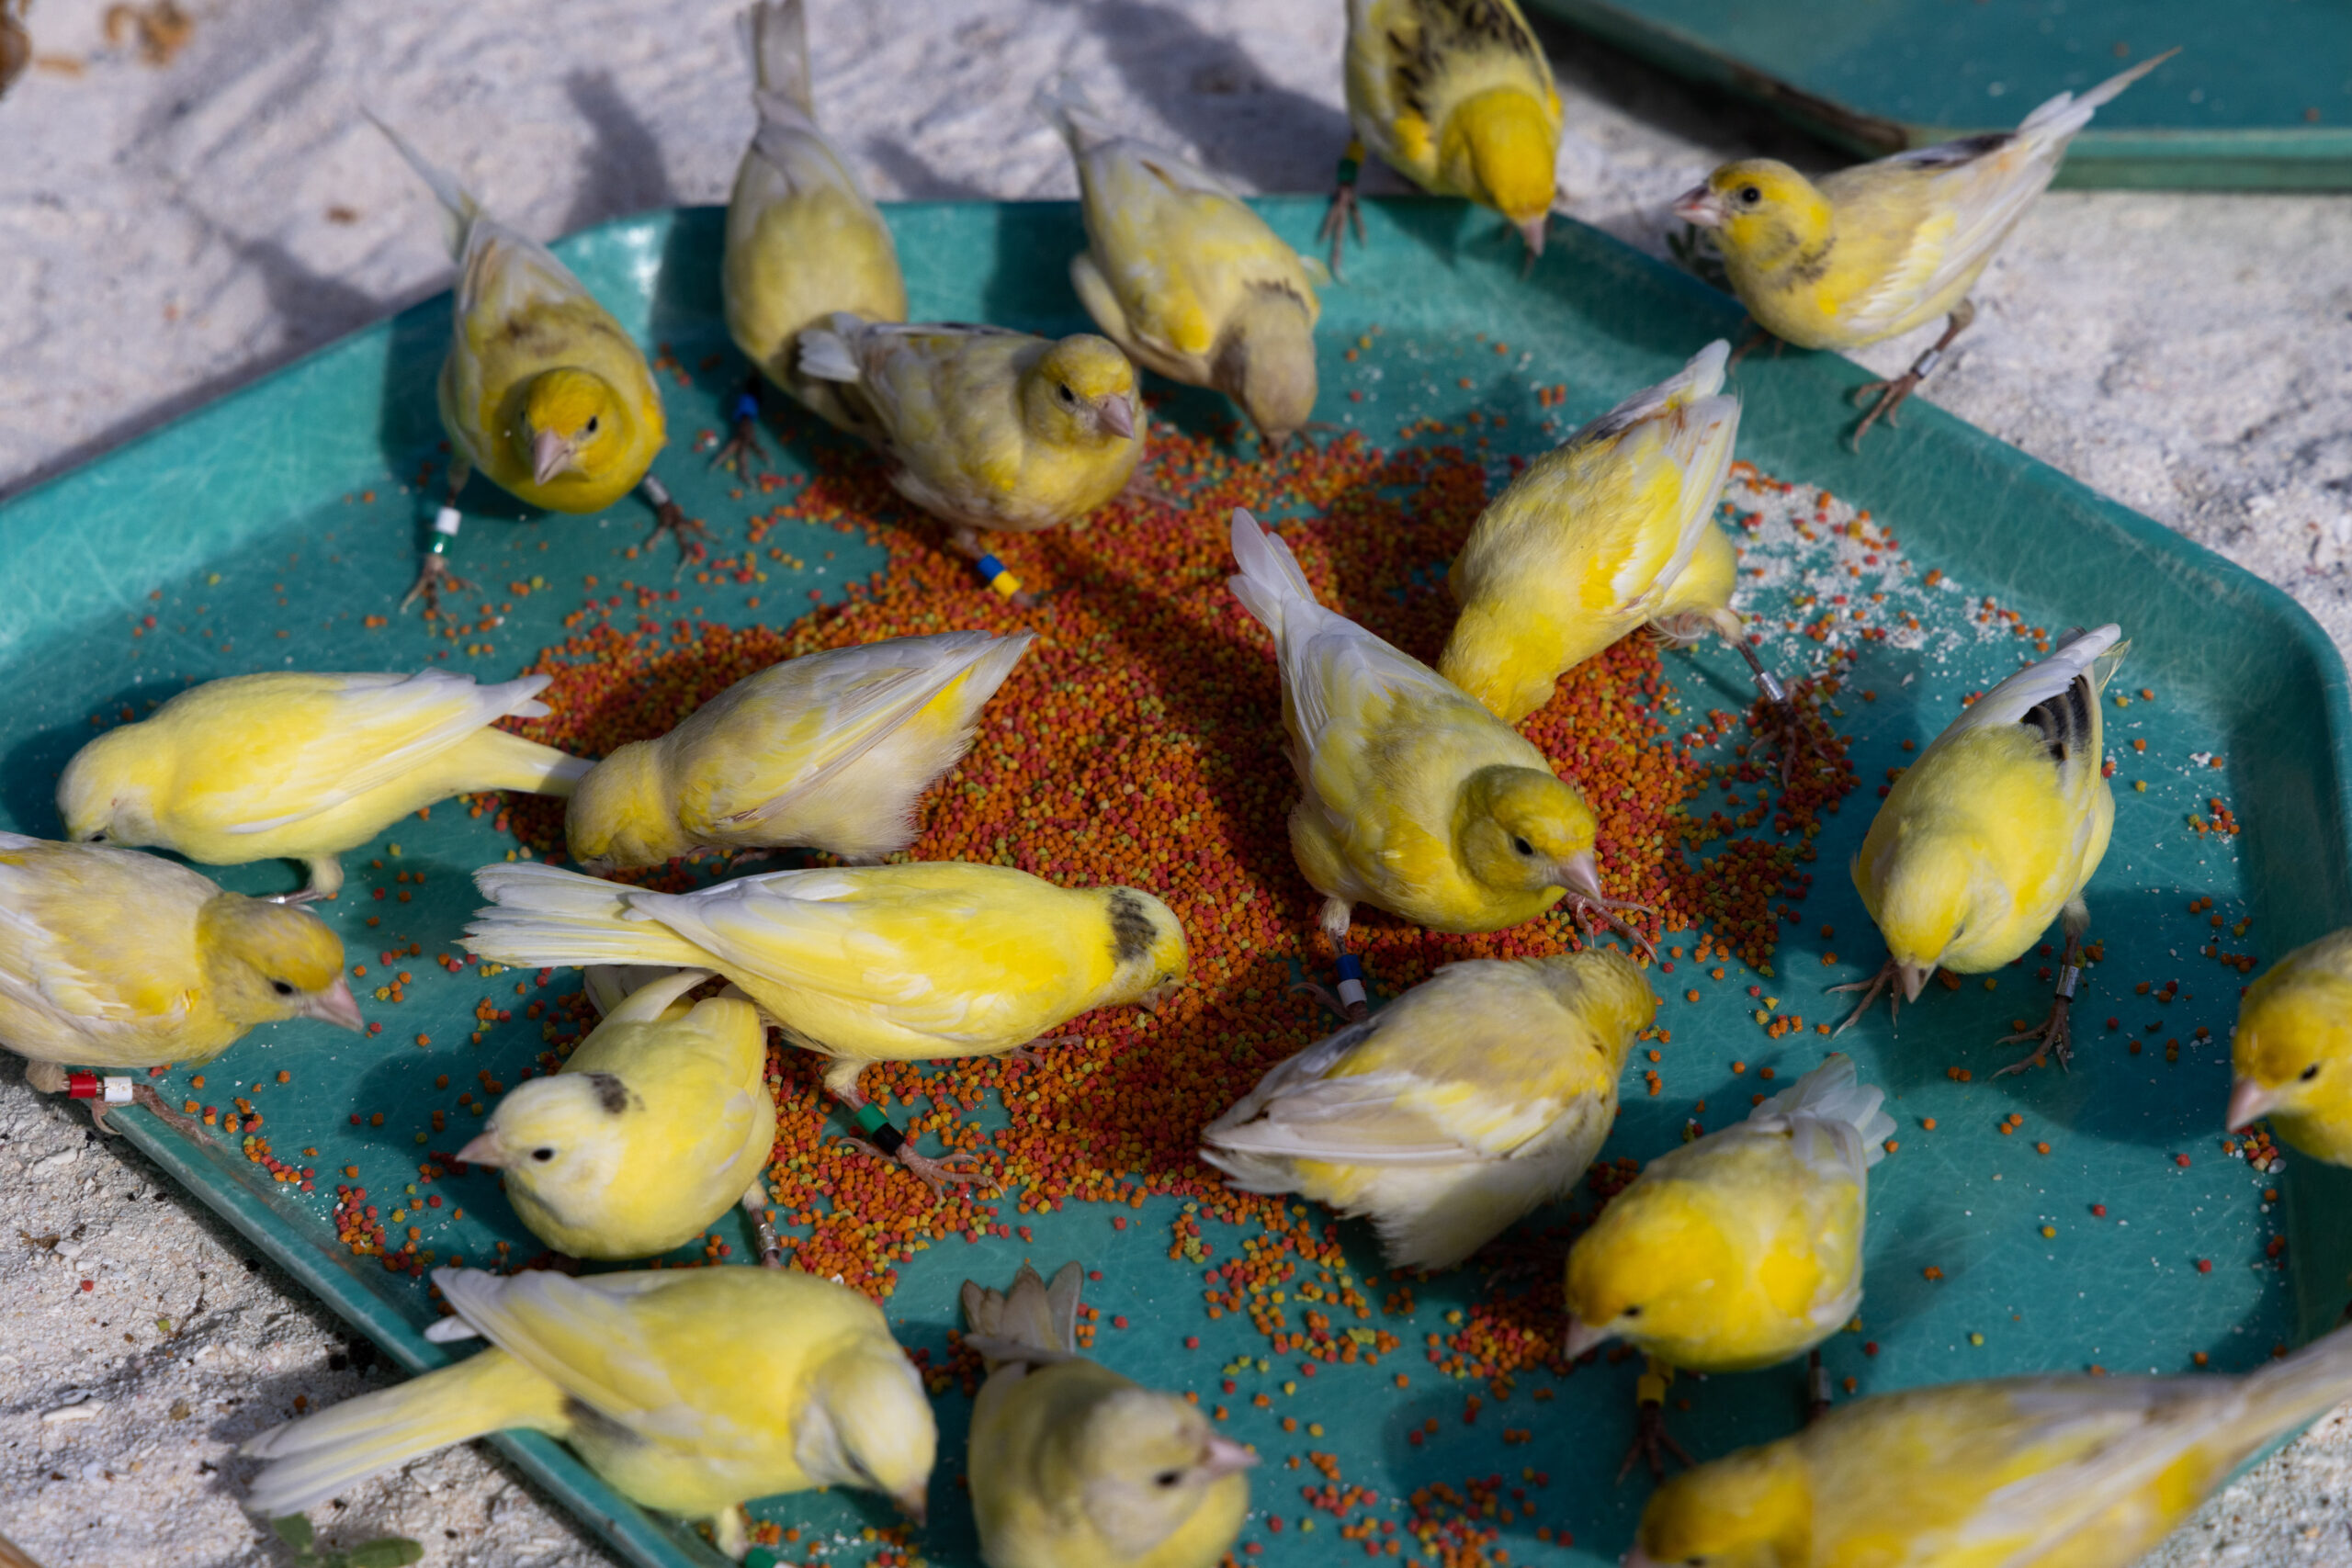 Bright yellow canaries eat in a group off a green tray